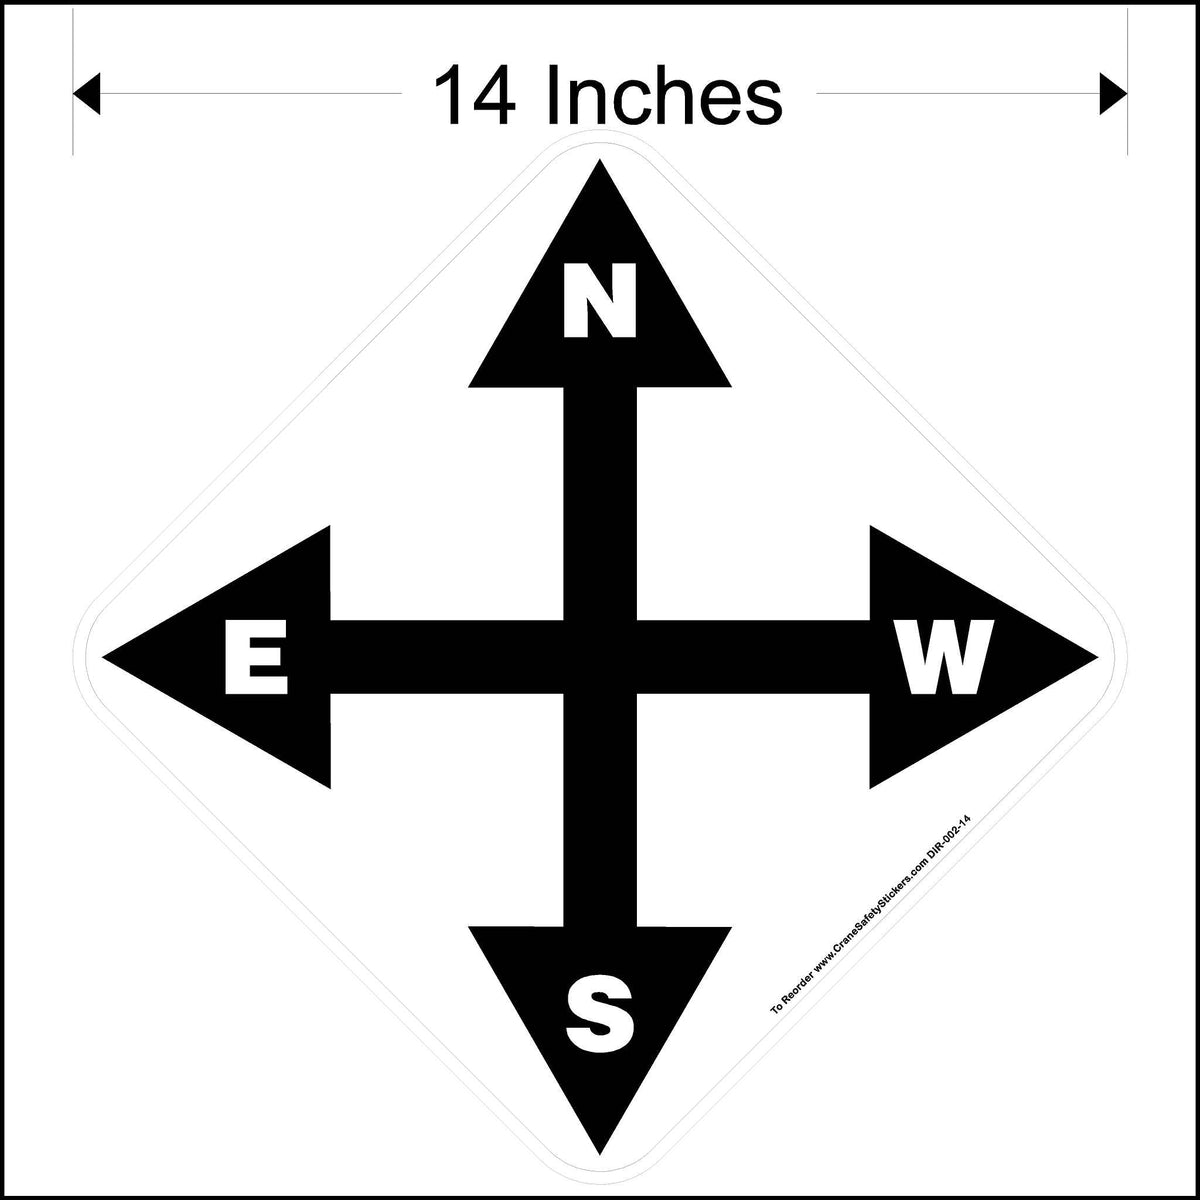 14 Inch North South West East Overhead Crane Directional Decal.